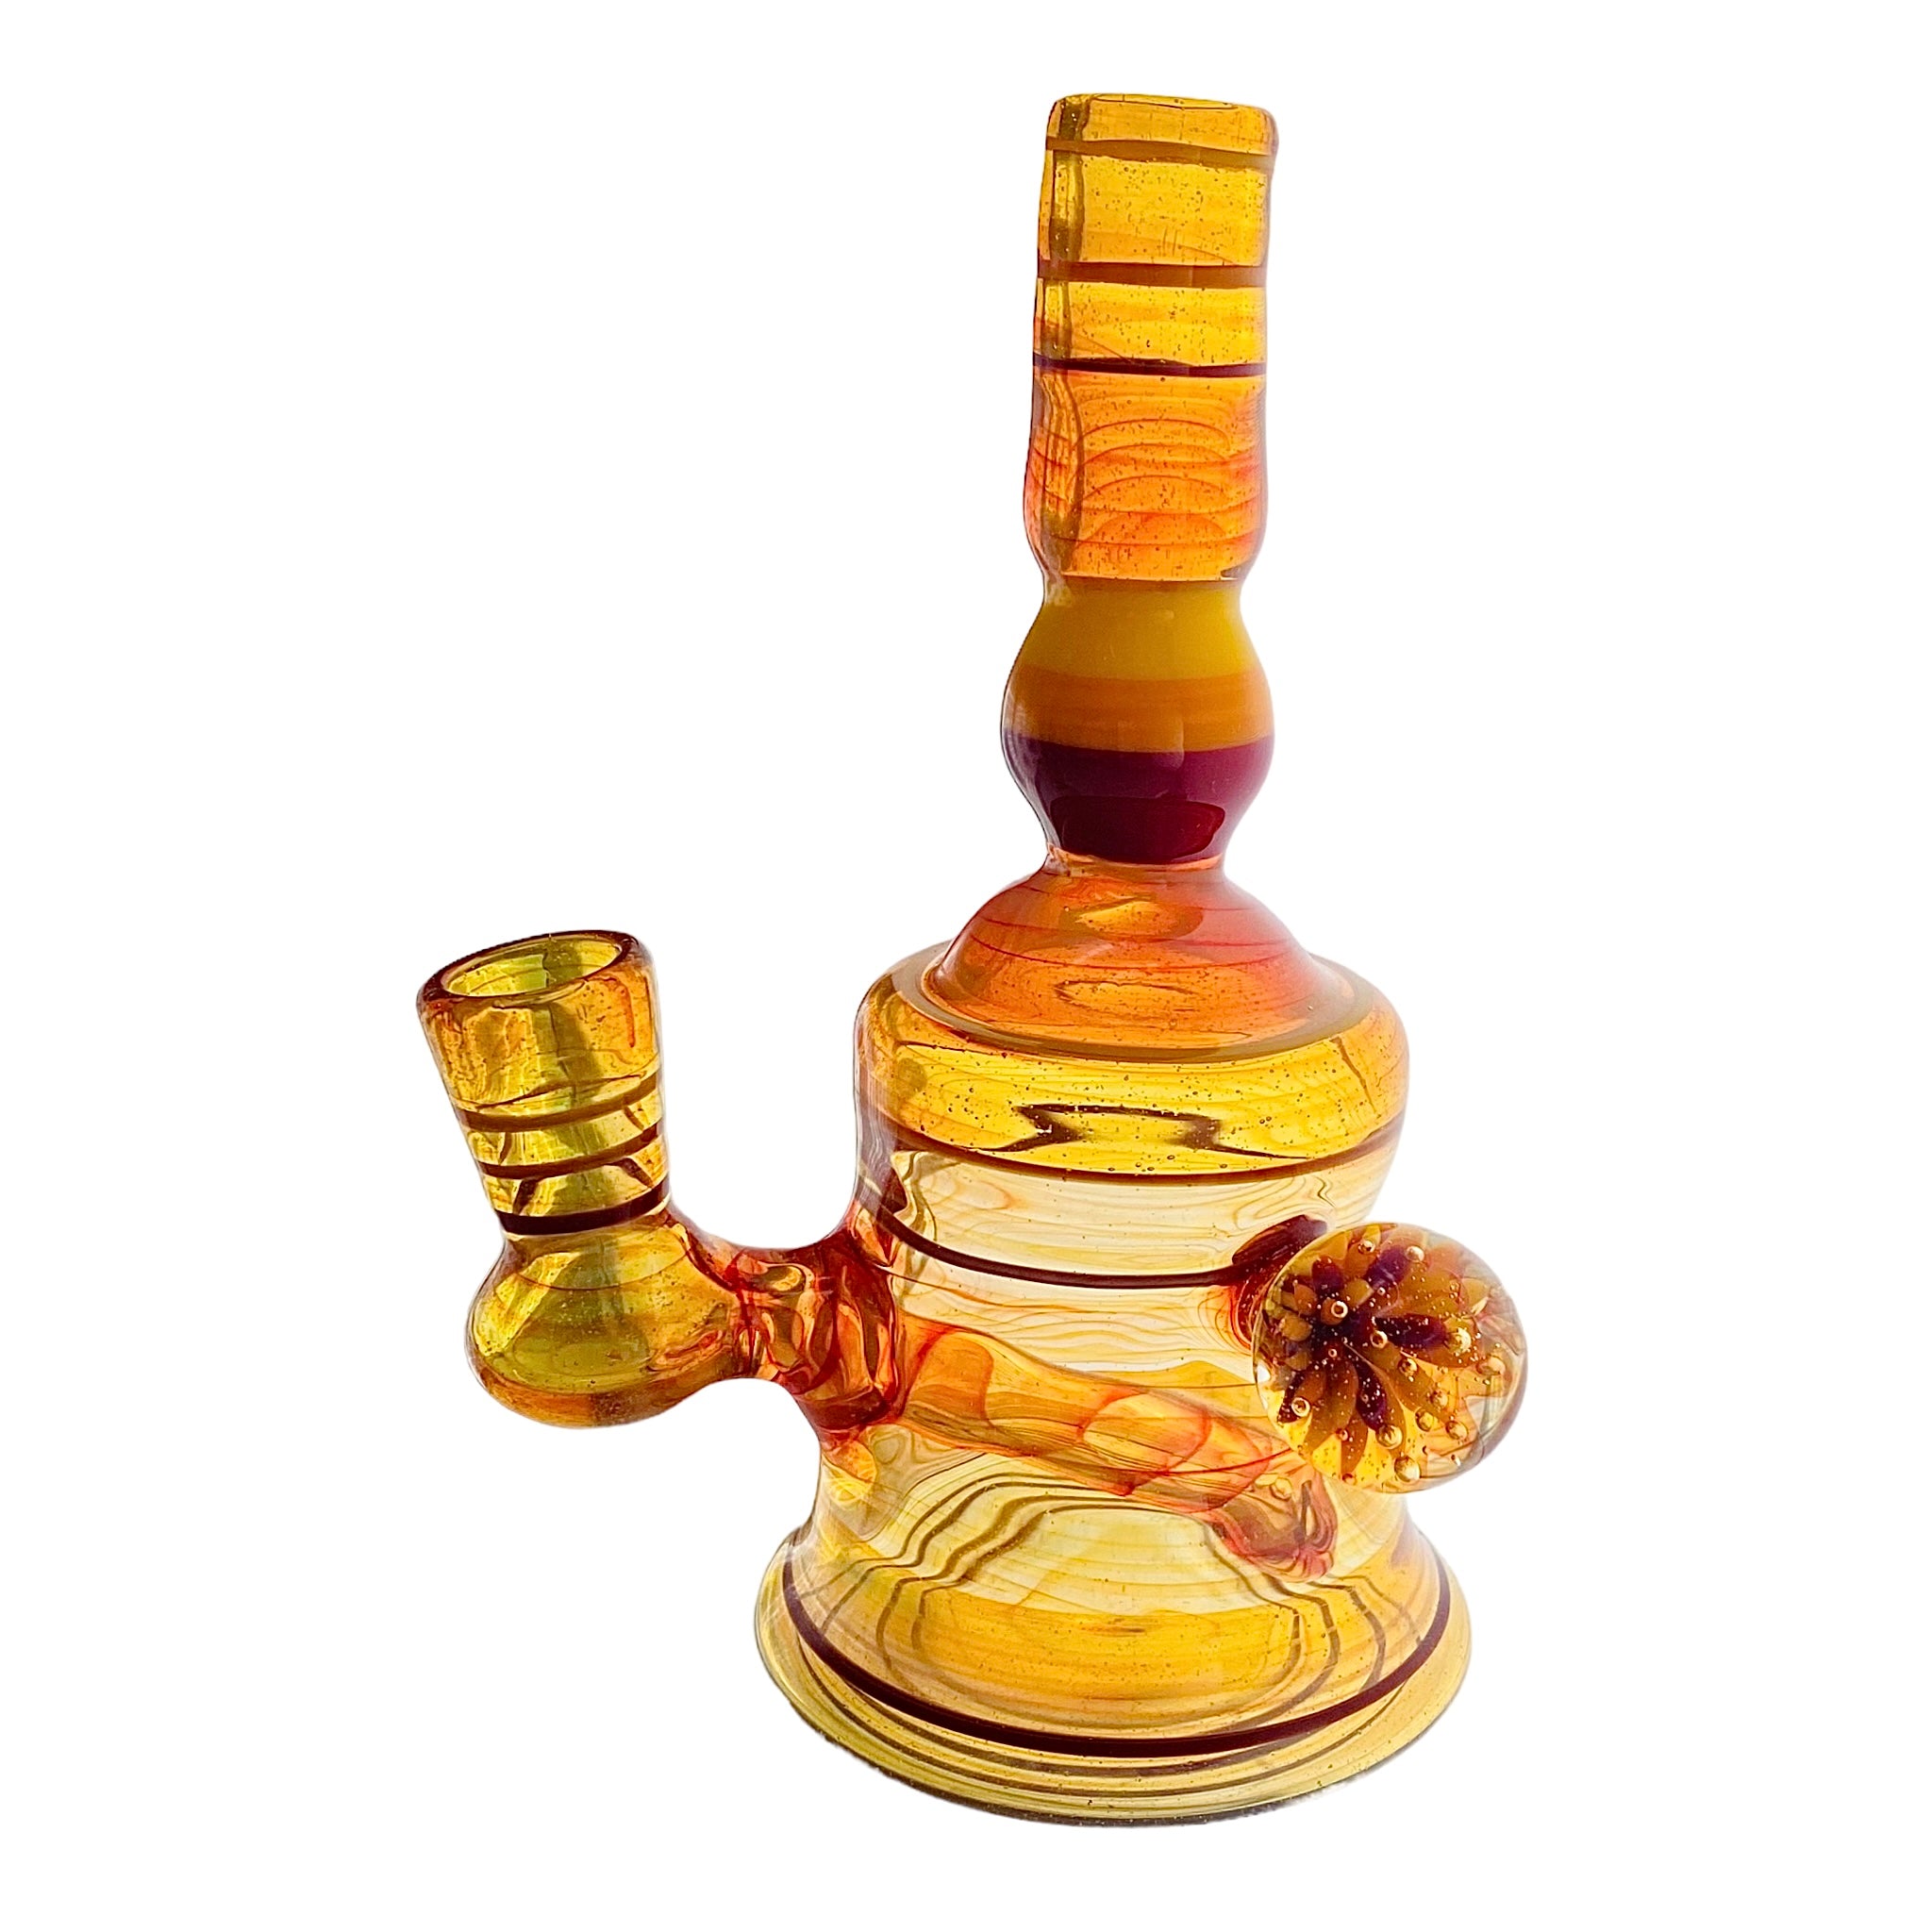 Collin Kennedy Glass - Translucent Amber Glass Dab Rig With Yellow, Orange, Red Linework